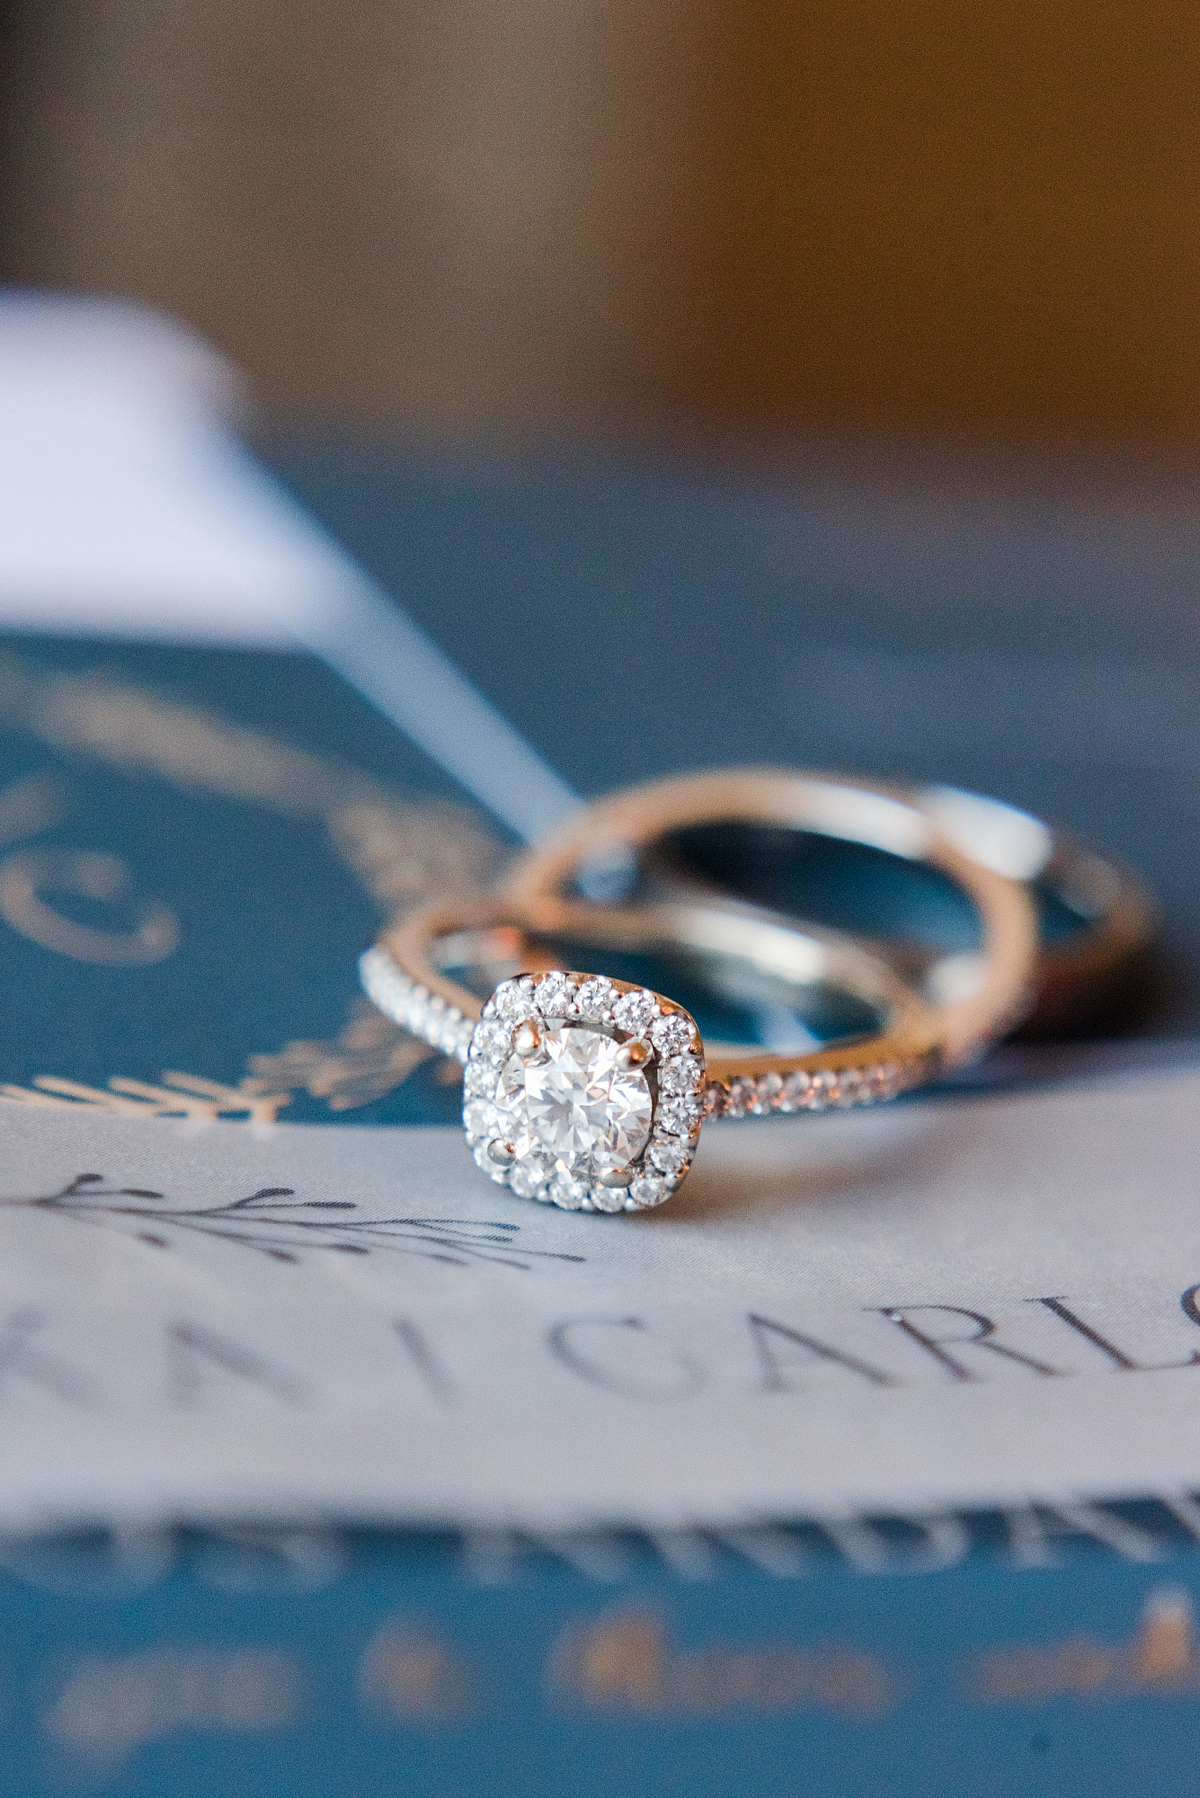 Wedding Ring Details at Virginia Cliffe Inn Wedding. Wedding Photography by Richmond Wedding Photographer Kailey Brianne Photography.